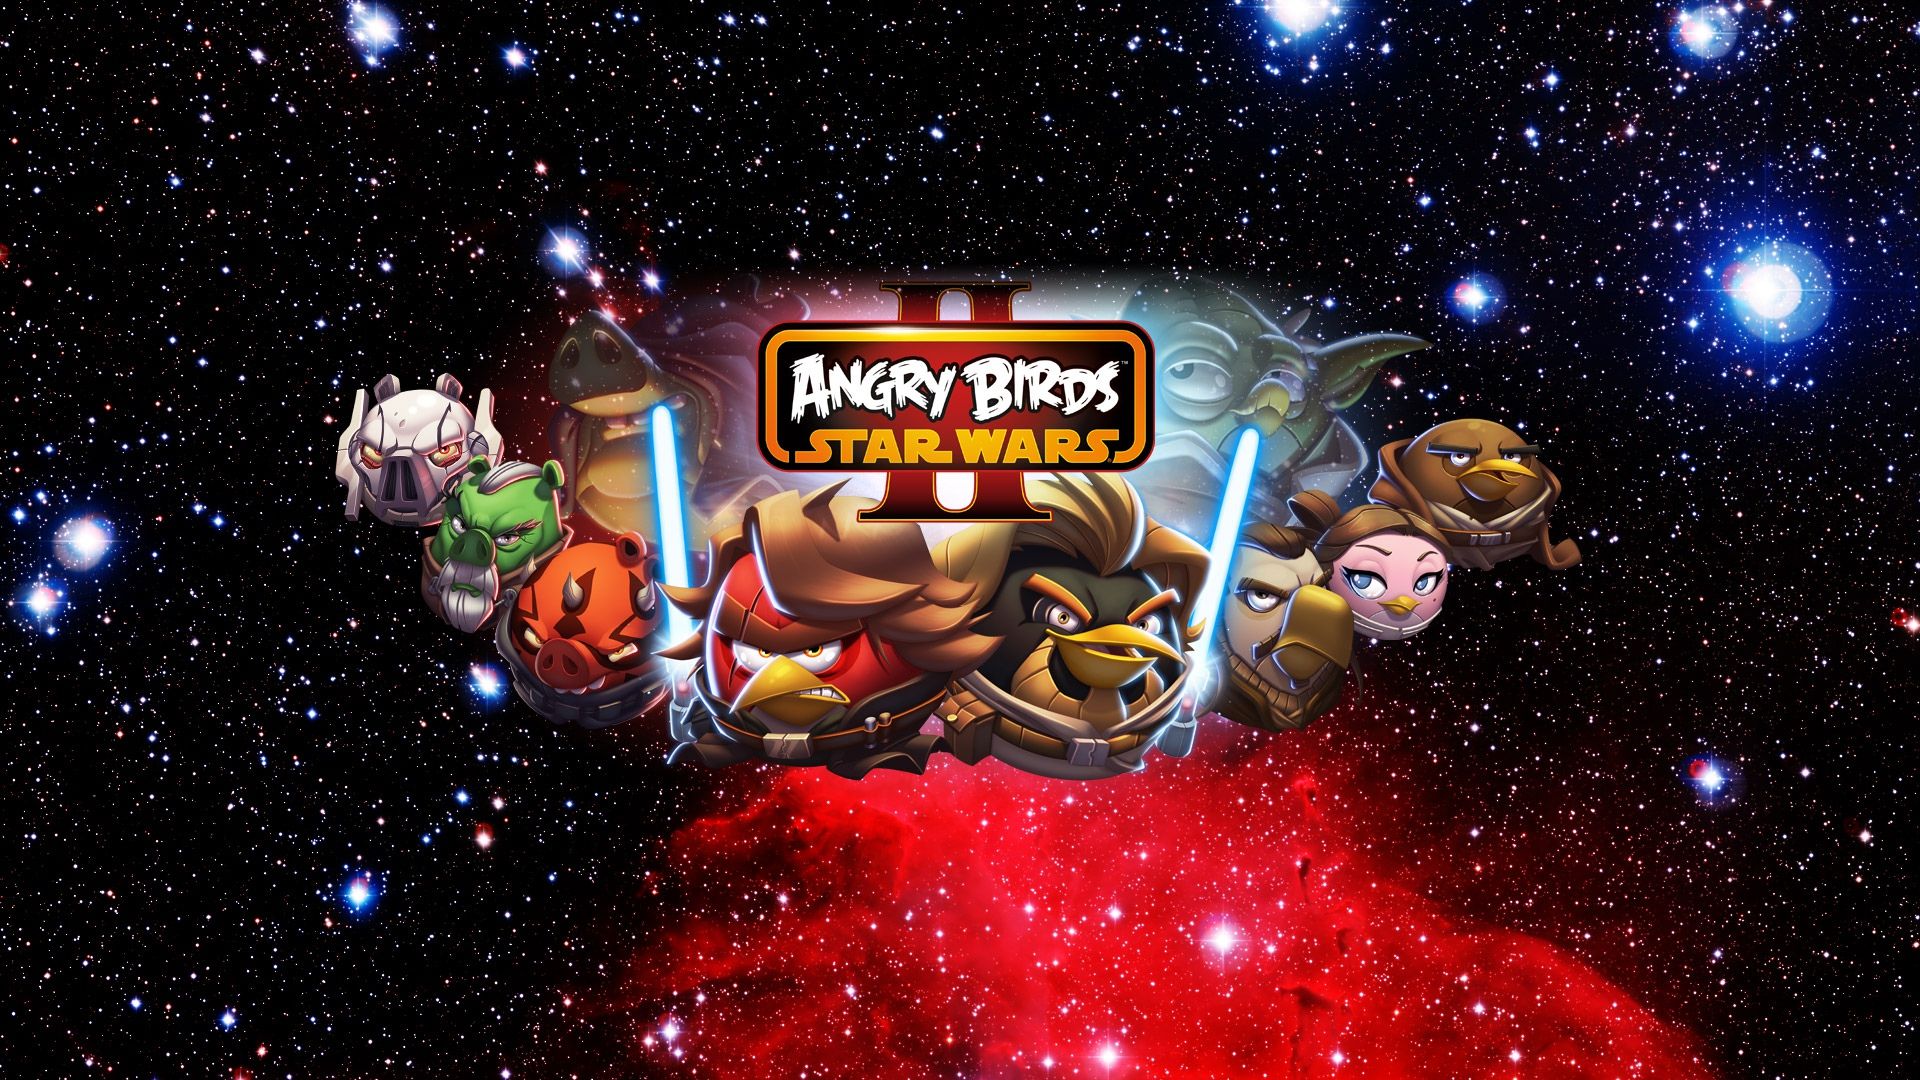 Angry Birds Star Wars 2 Backgrounds.